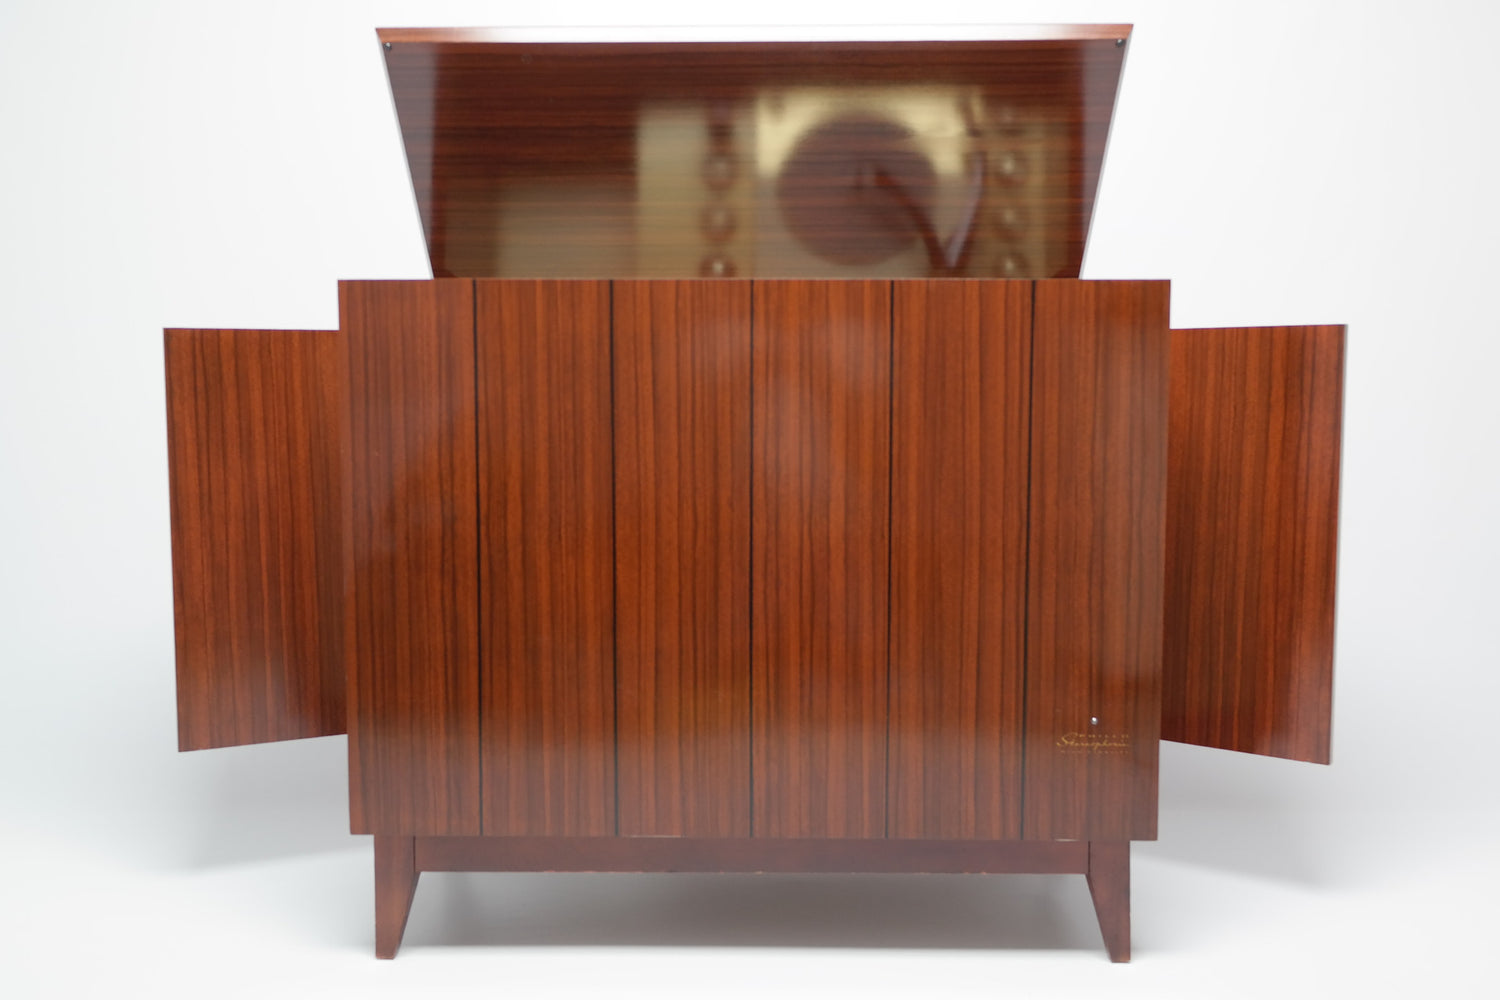 Mid Century Philco Stereo Console Record Player - Bluetooth Dual Tube Amplifers The Vintedge Co.